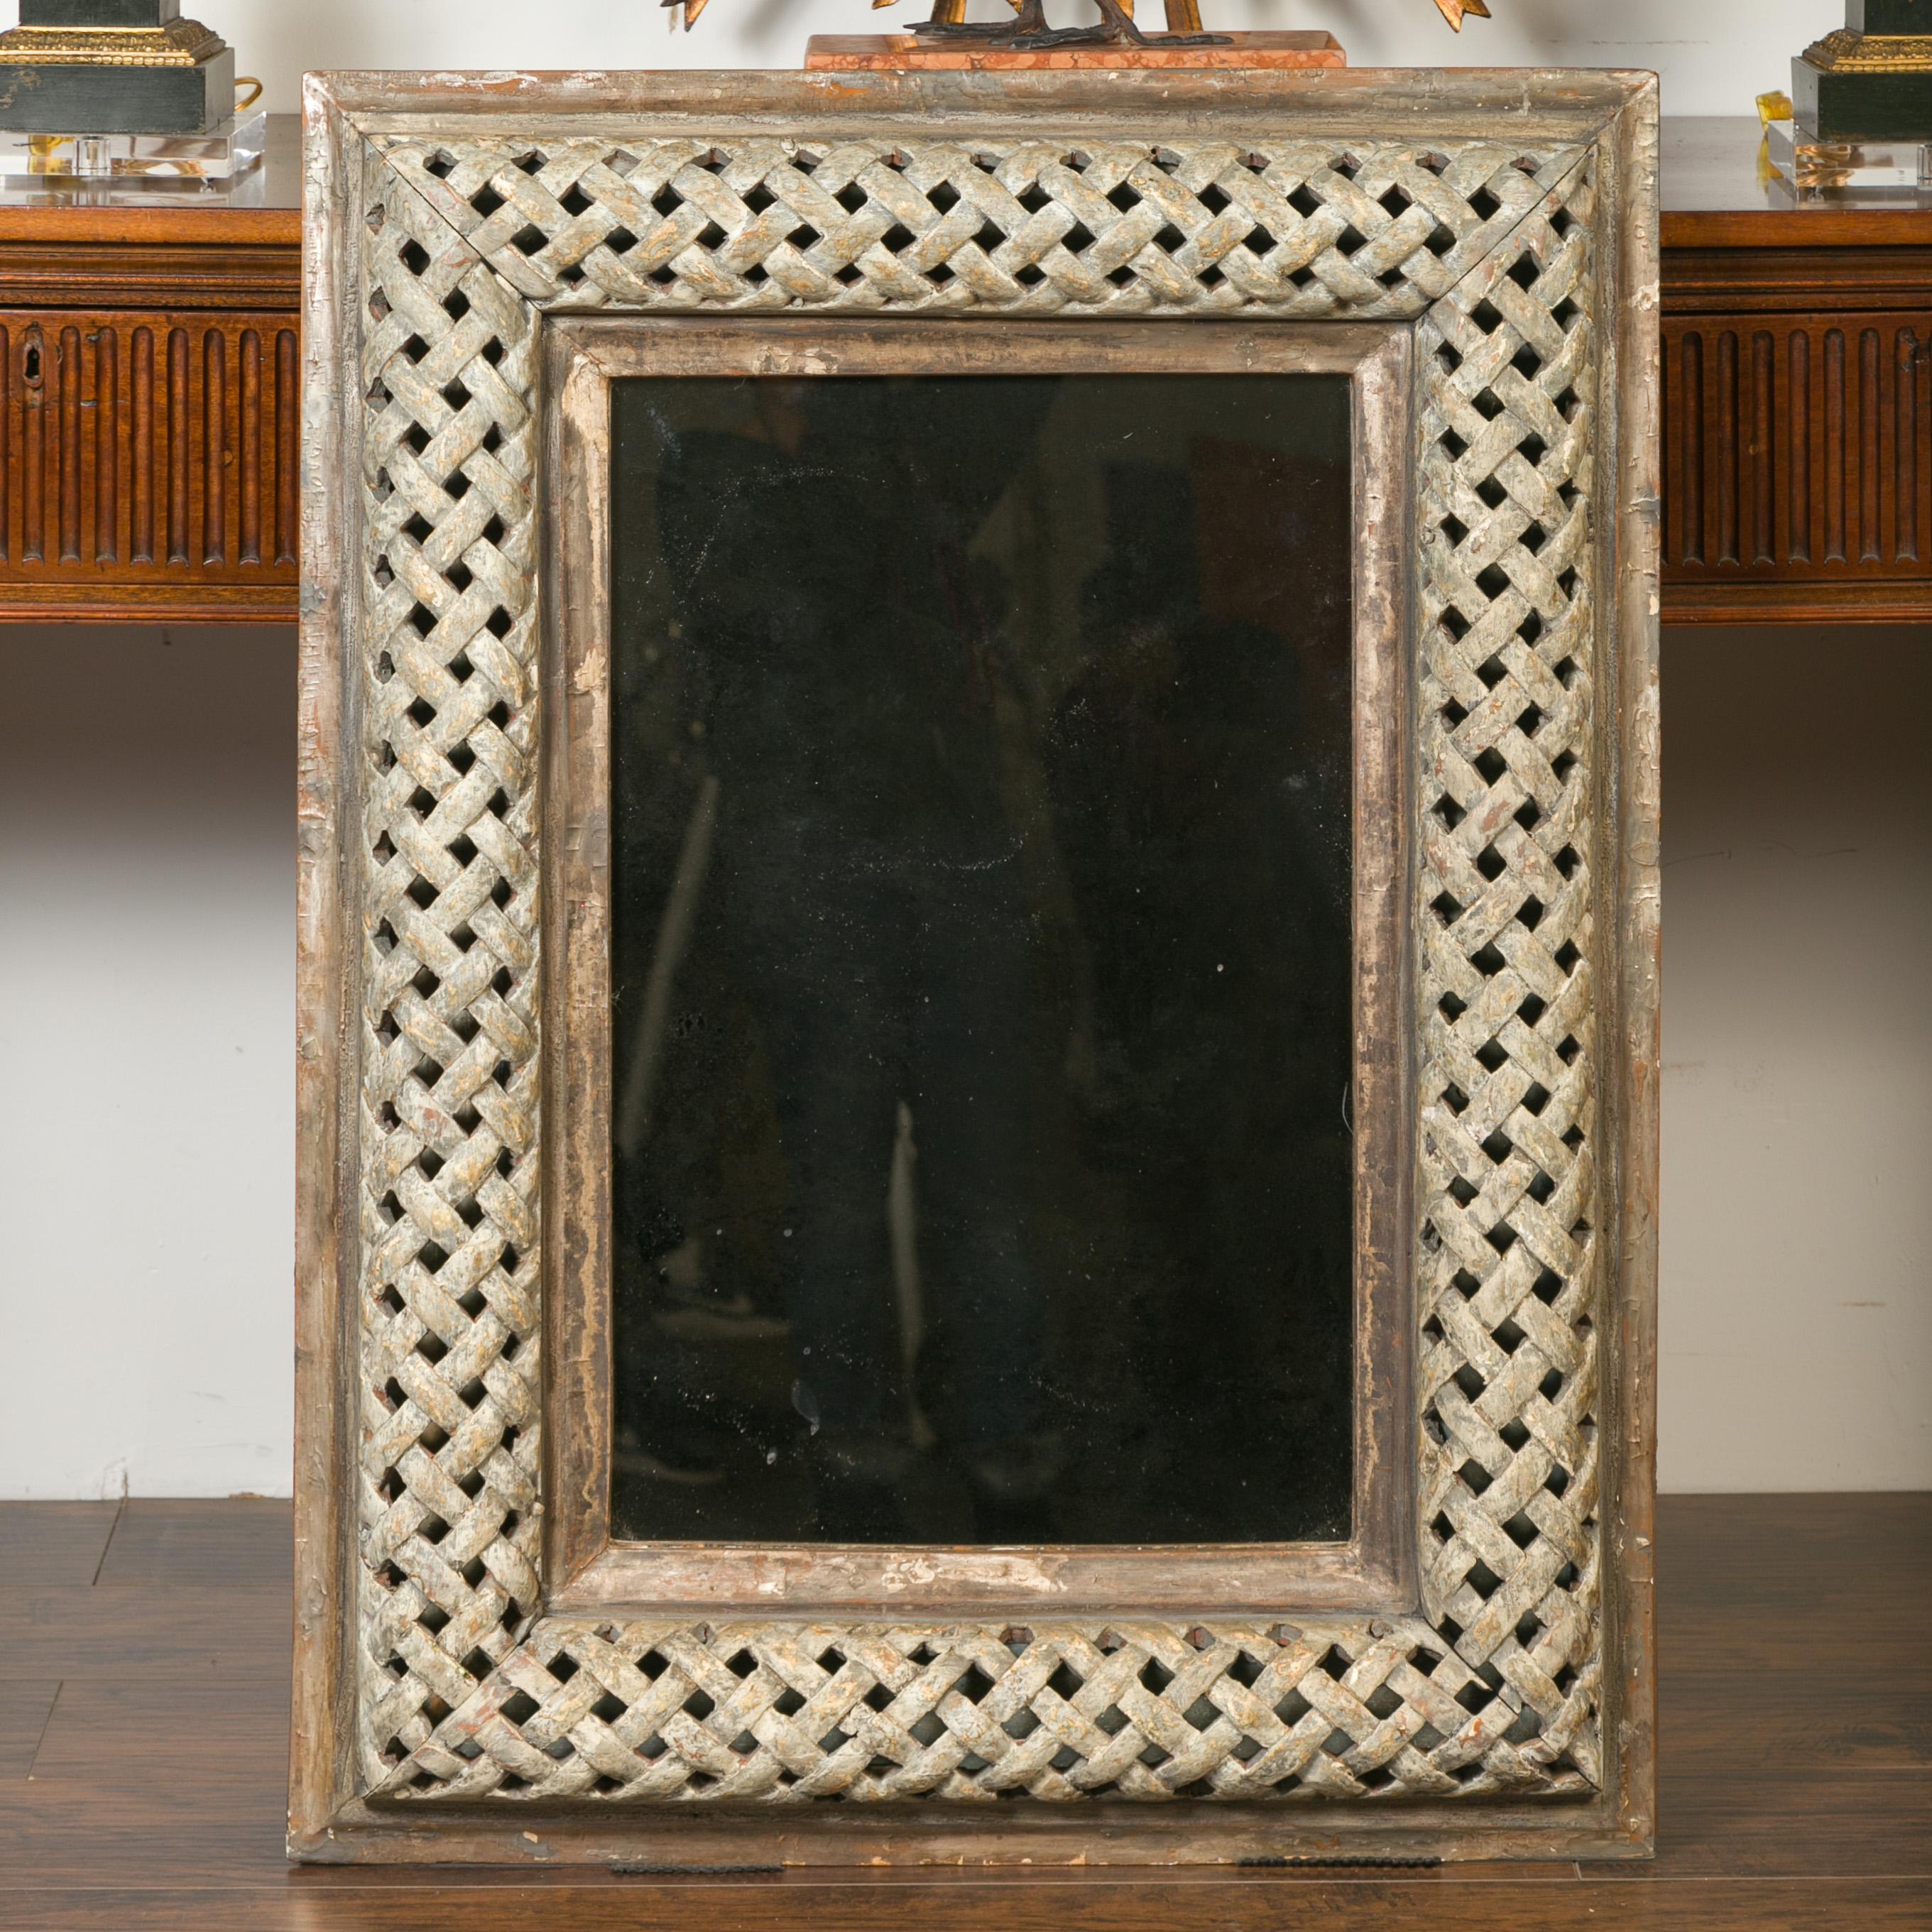 19th Century Italian 1870s Painted and Carved Wooden Mirror with Trellis Inspired Motifs